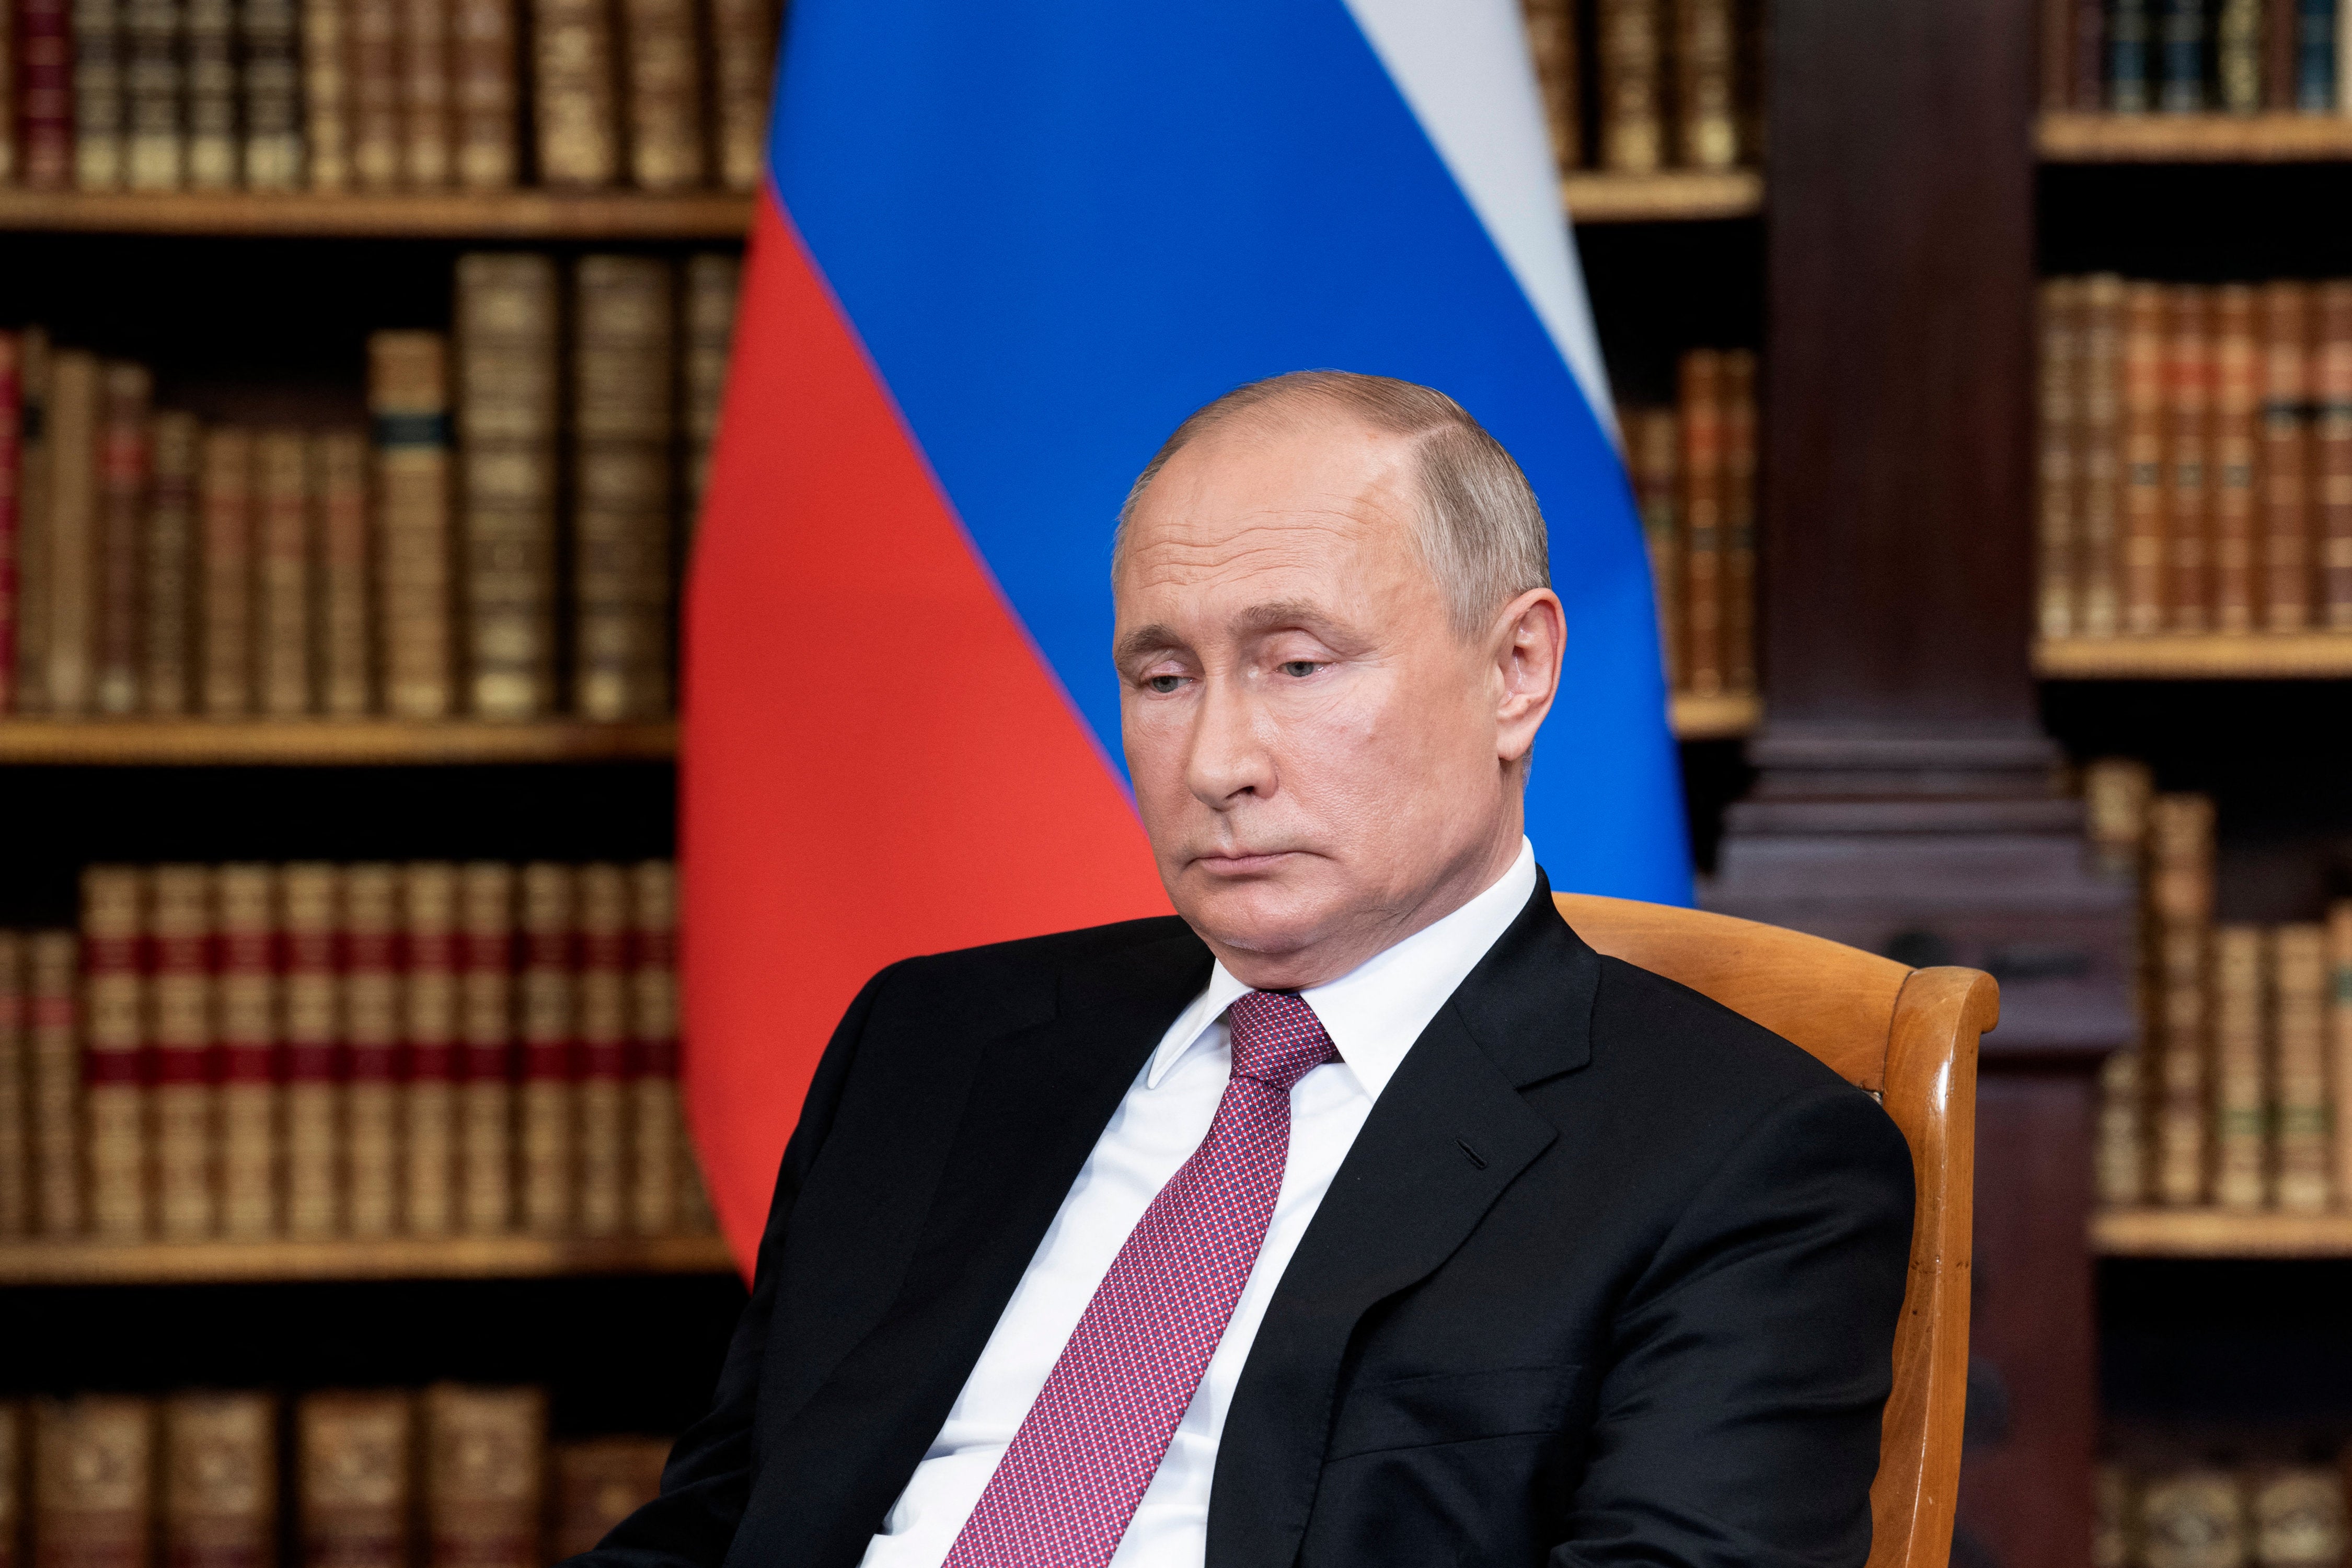 Russian president Vladimir Putin is taking the biggest risk of his 20-year reign